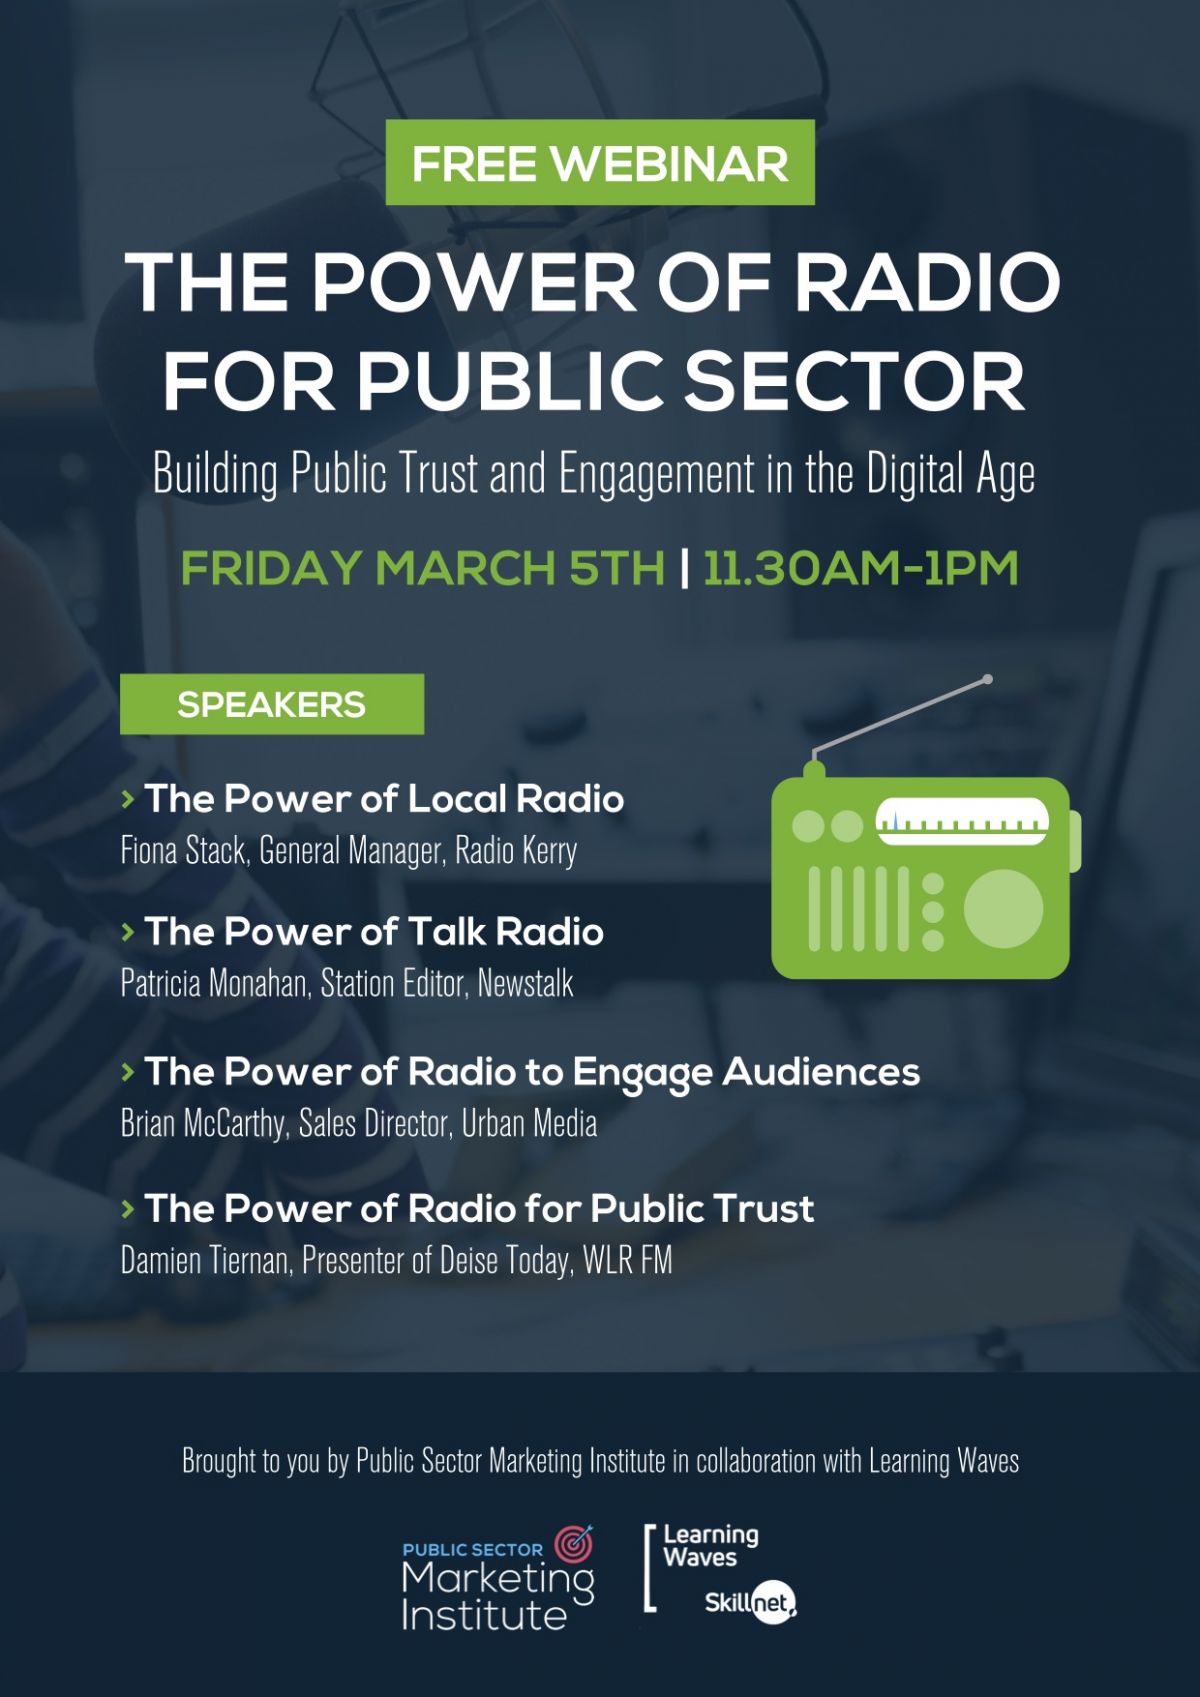 Building Public Trust and Engagement in the Digital Age using the Power of Radio